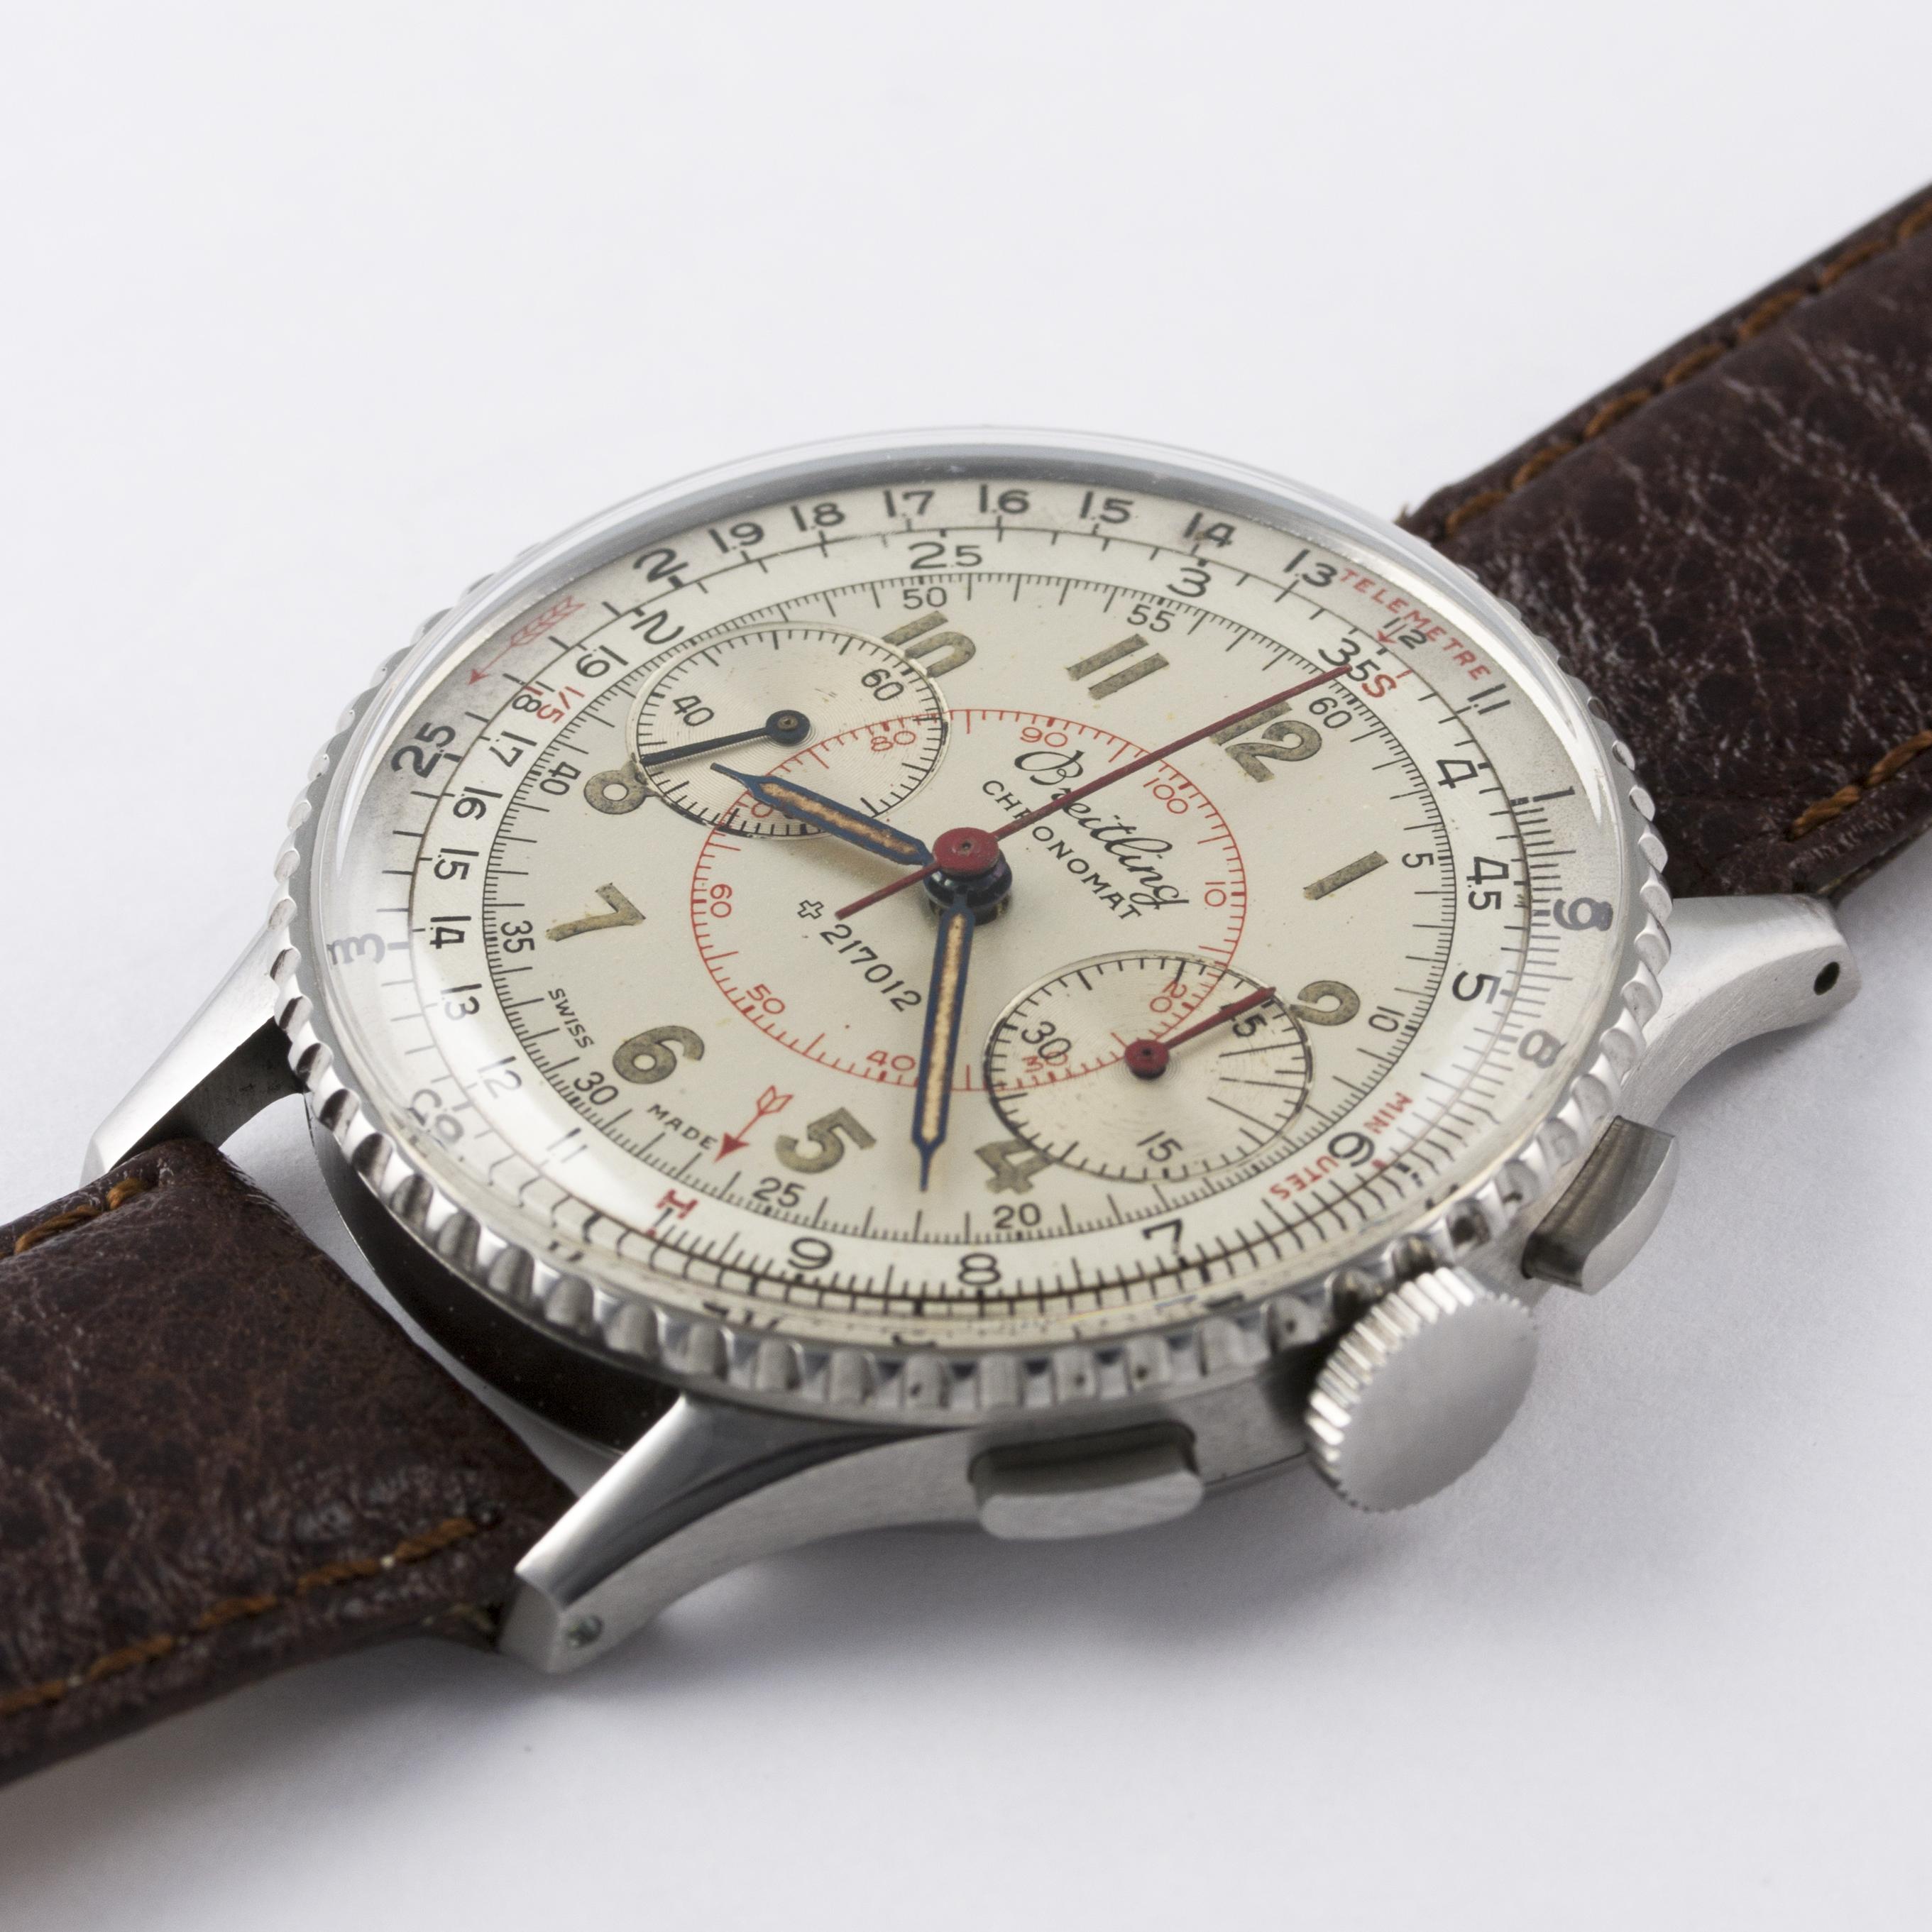 A RARE GENTLEMAN'S STAINLESS STEEL BREITLING CHRONOMAT CHRONOGRAPH WRIST WATCH CIRCA 1950s, REF. 769 - Image 3 of 8